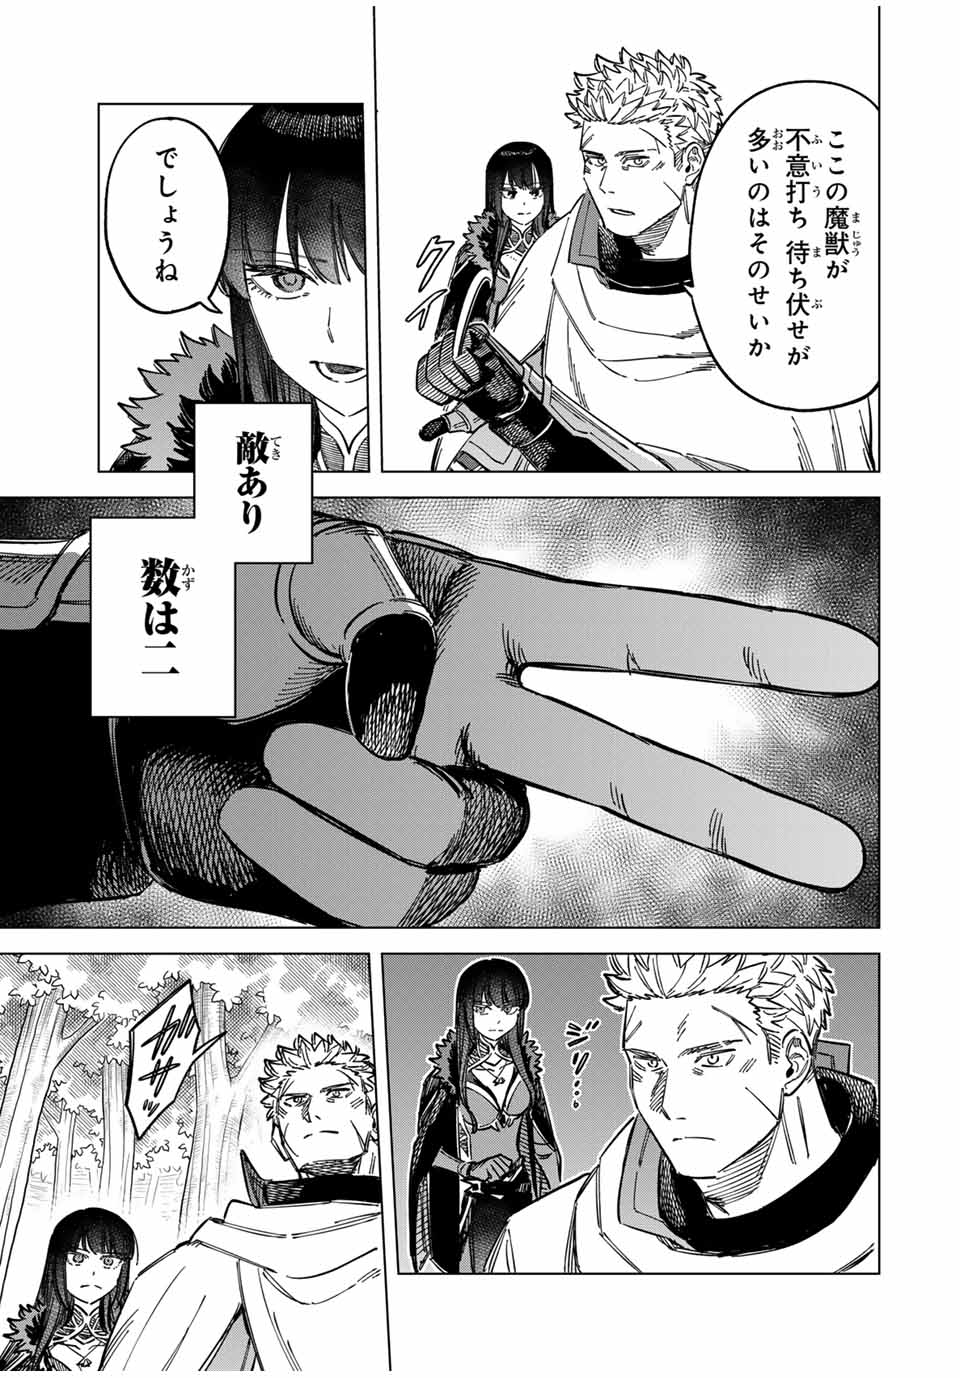 Witch and Mercenary 魔女と傭兵 第9.1話 - Page 11